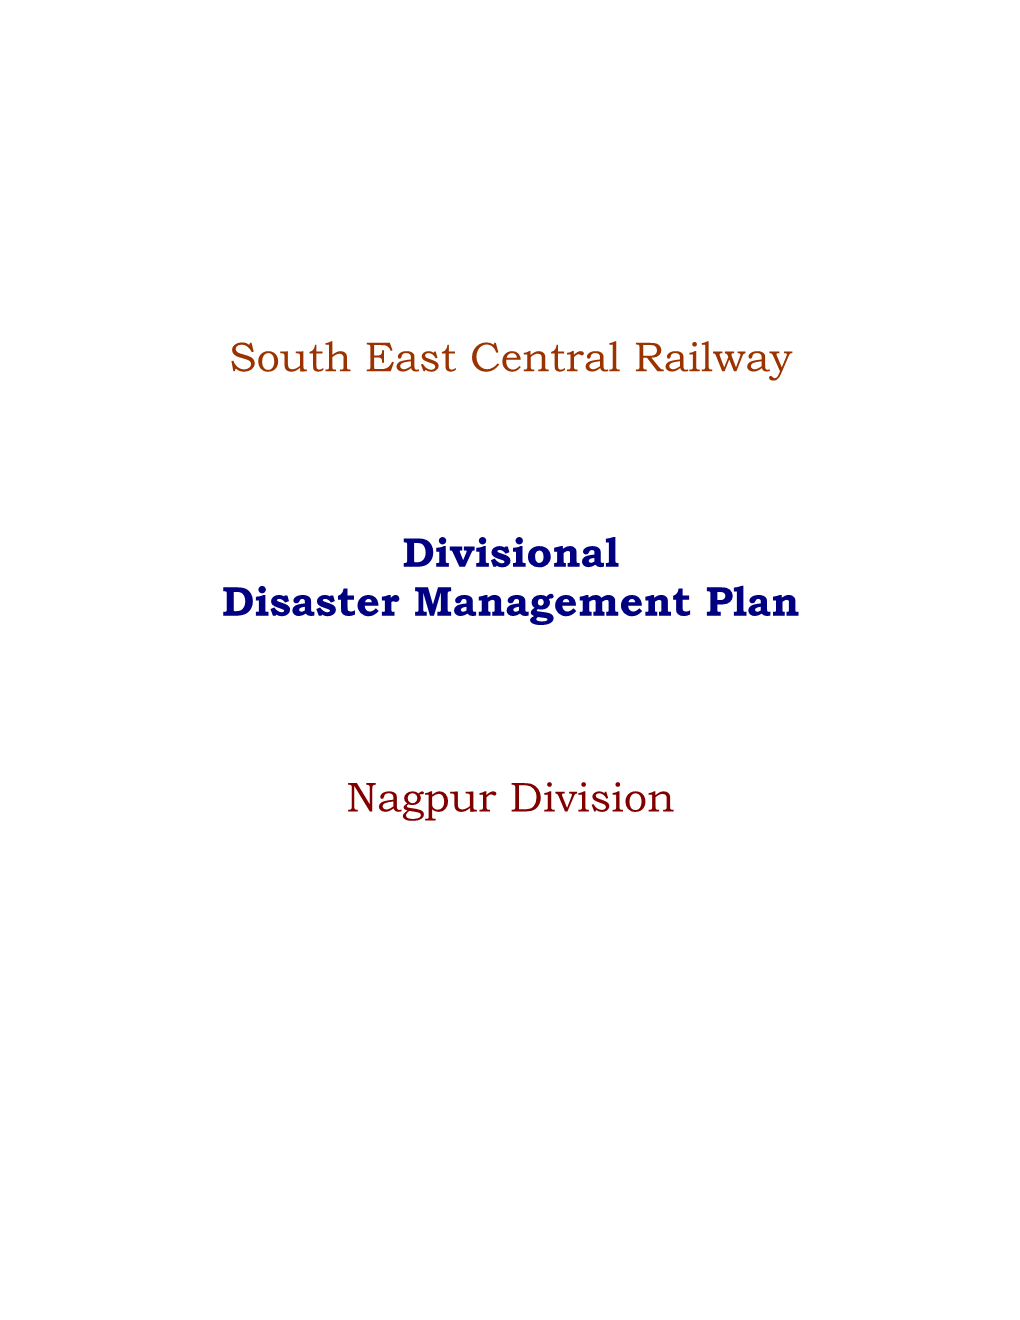 South East Central Railway Divisional Disaster Management Plan Nagpur